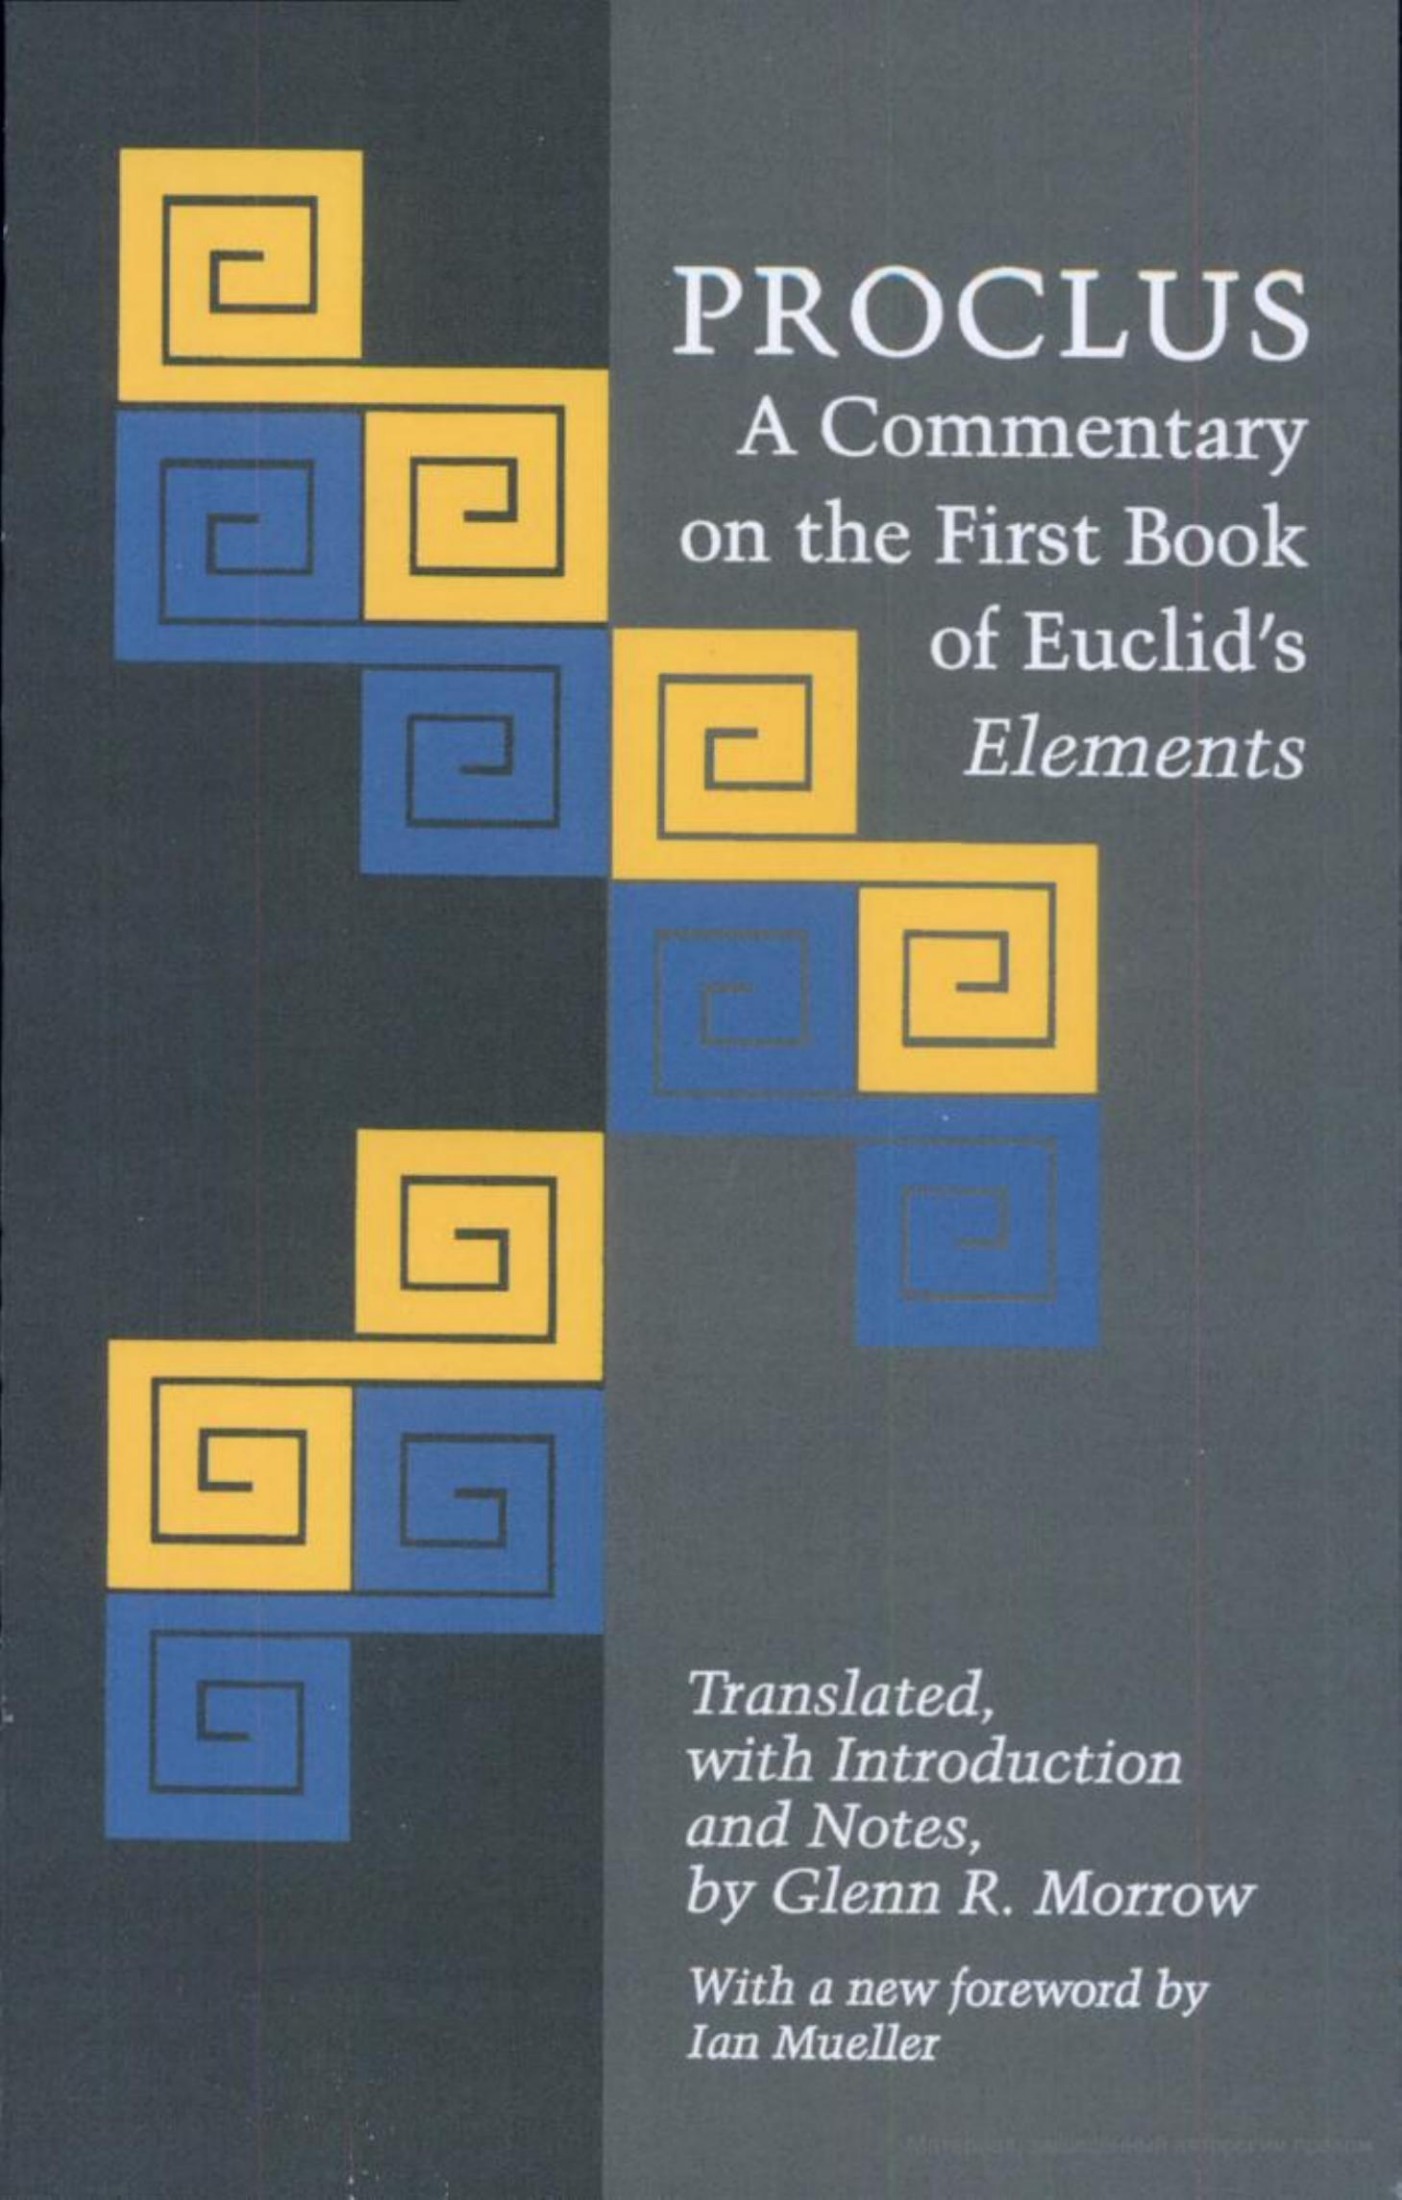 Proclus: A Commentary on the First Book of Euclid's Elements. Translated, with Introduction and Notes, by Glen R. Morrow